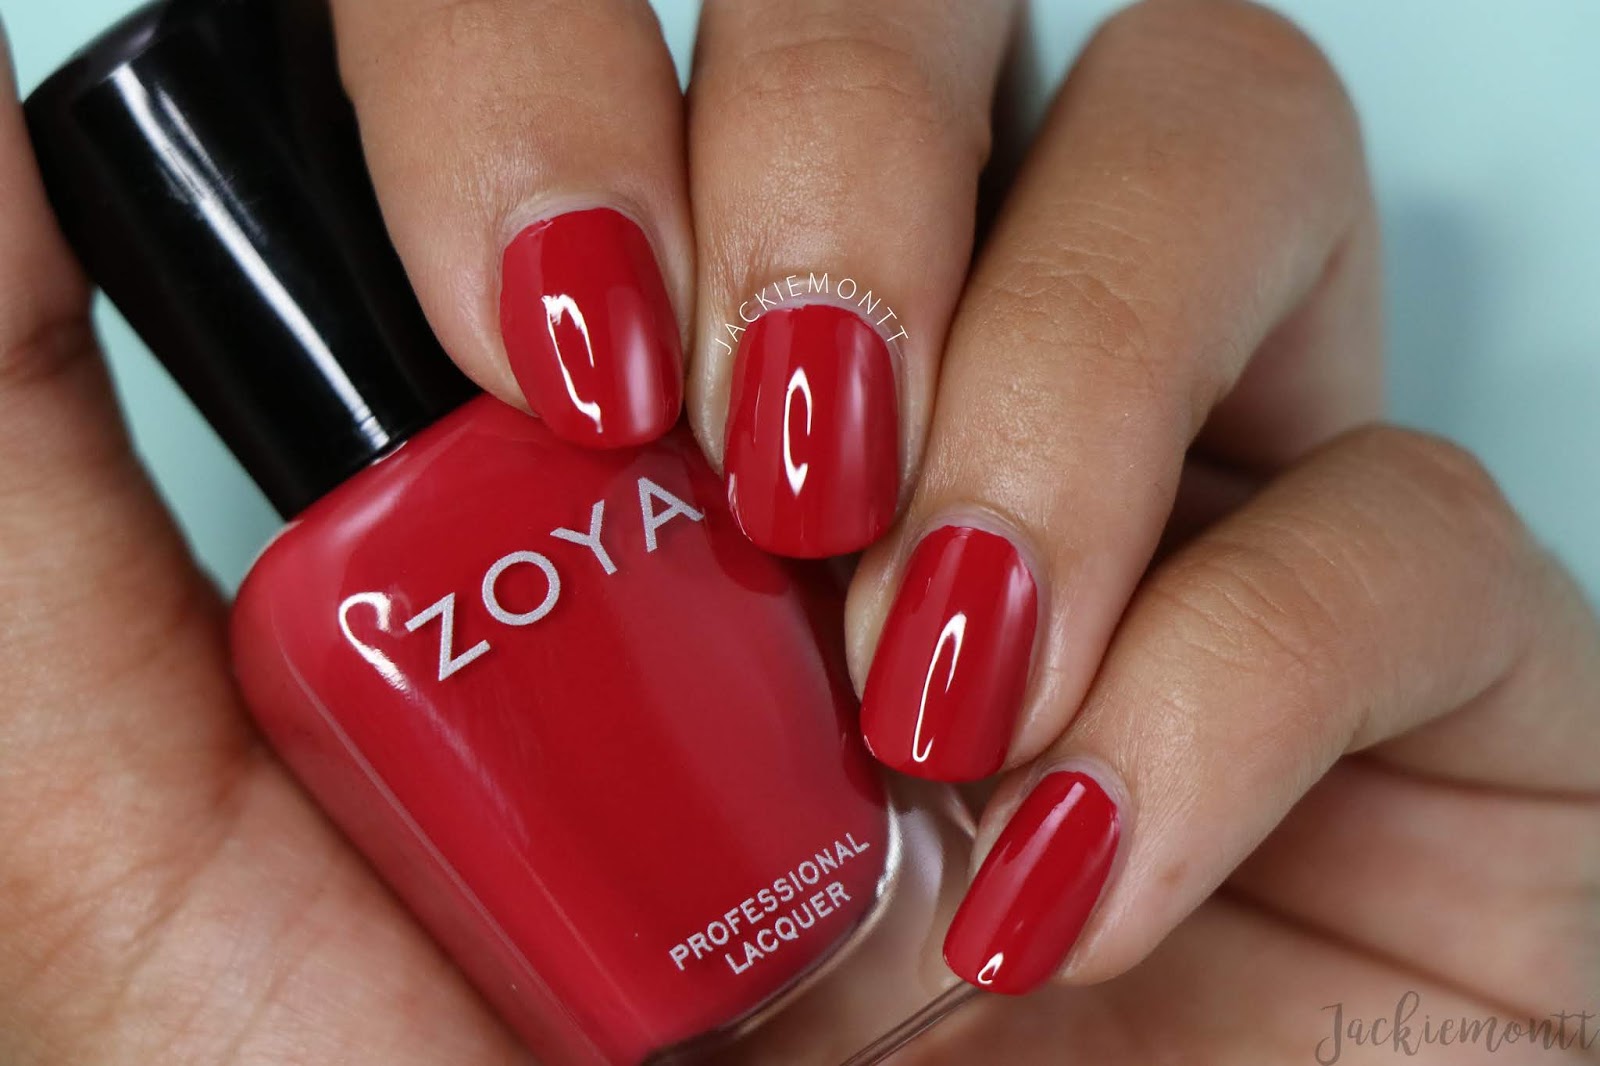 Zoya Sensual Collection Swatches and Review [Fall 2019] - JACKIEMONTT